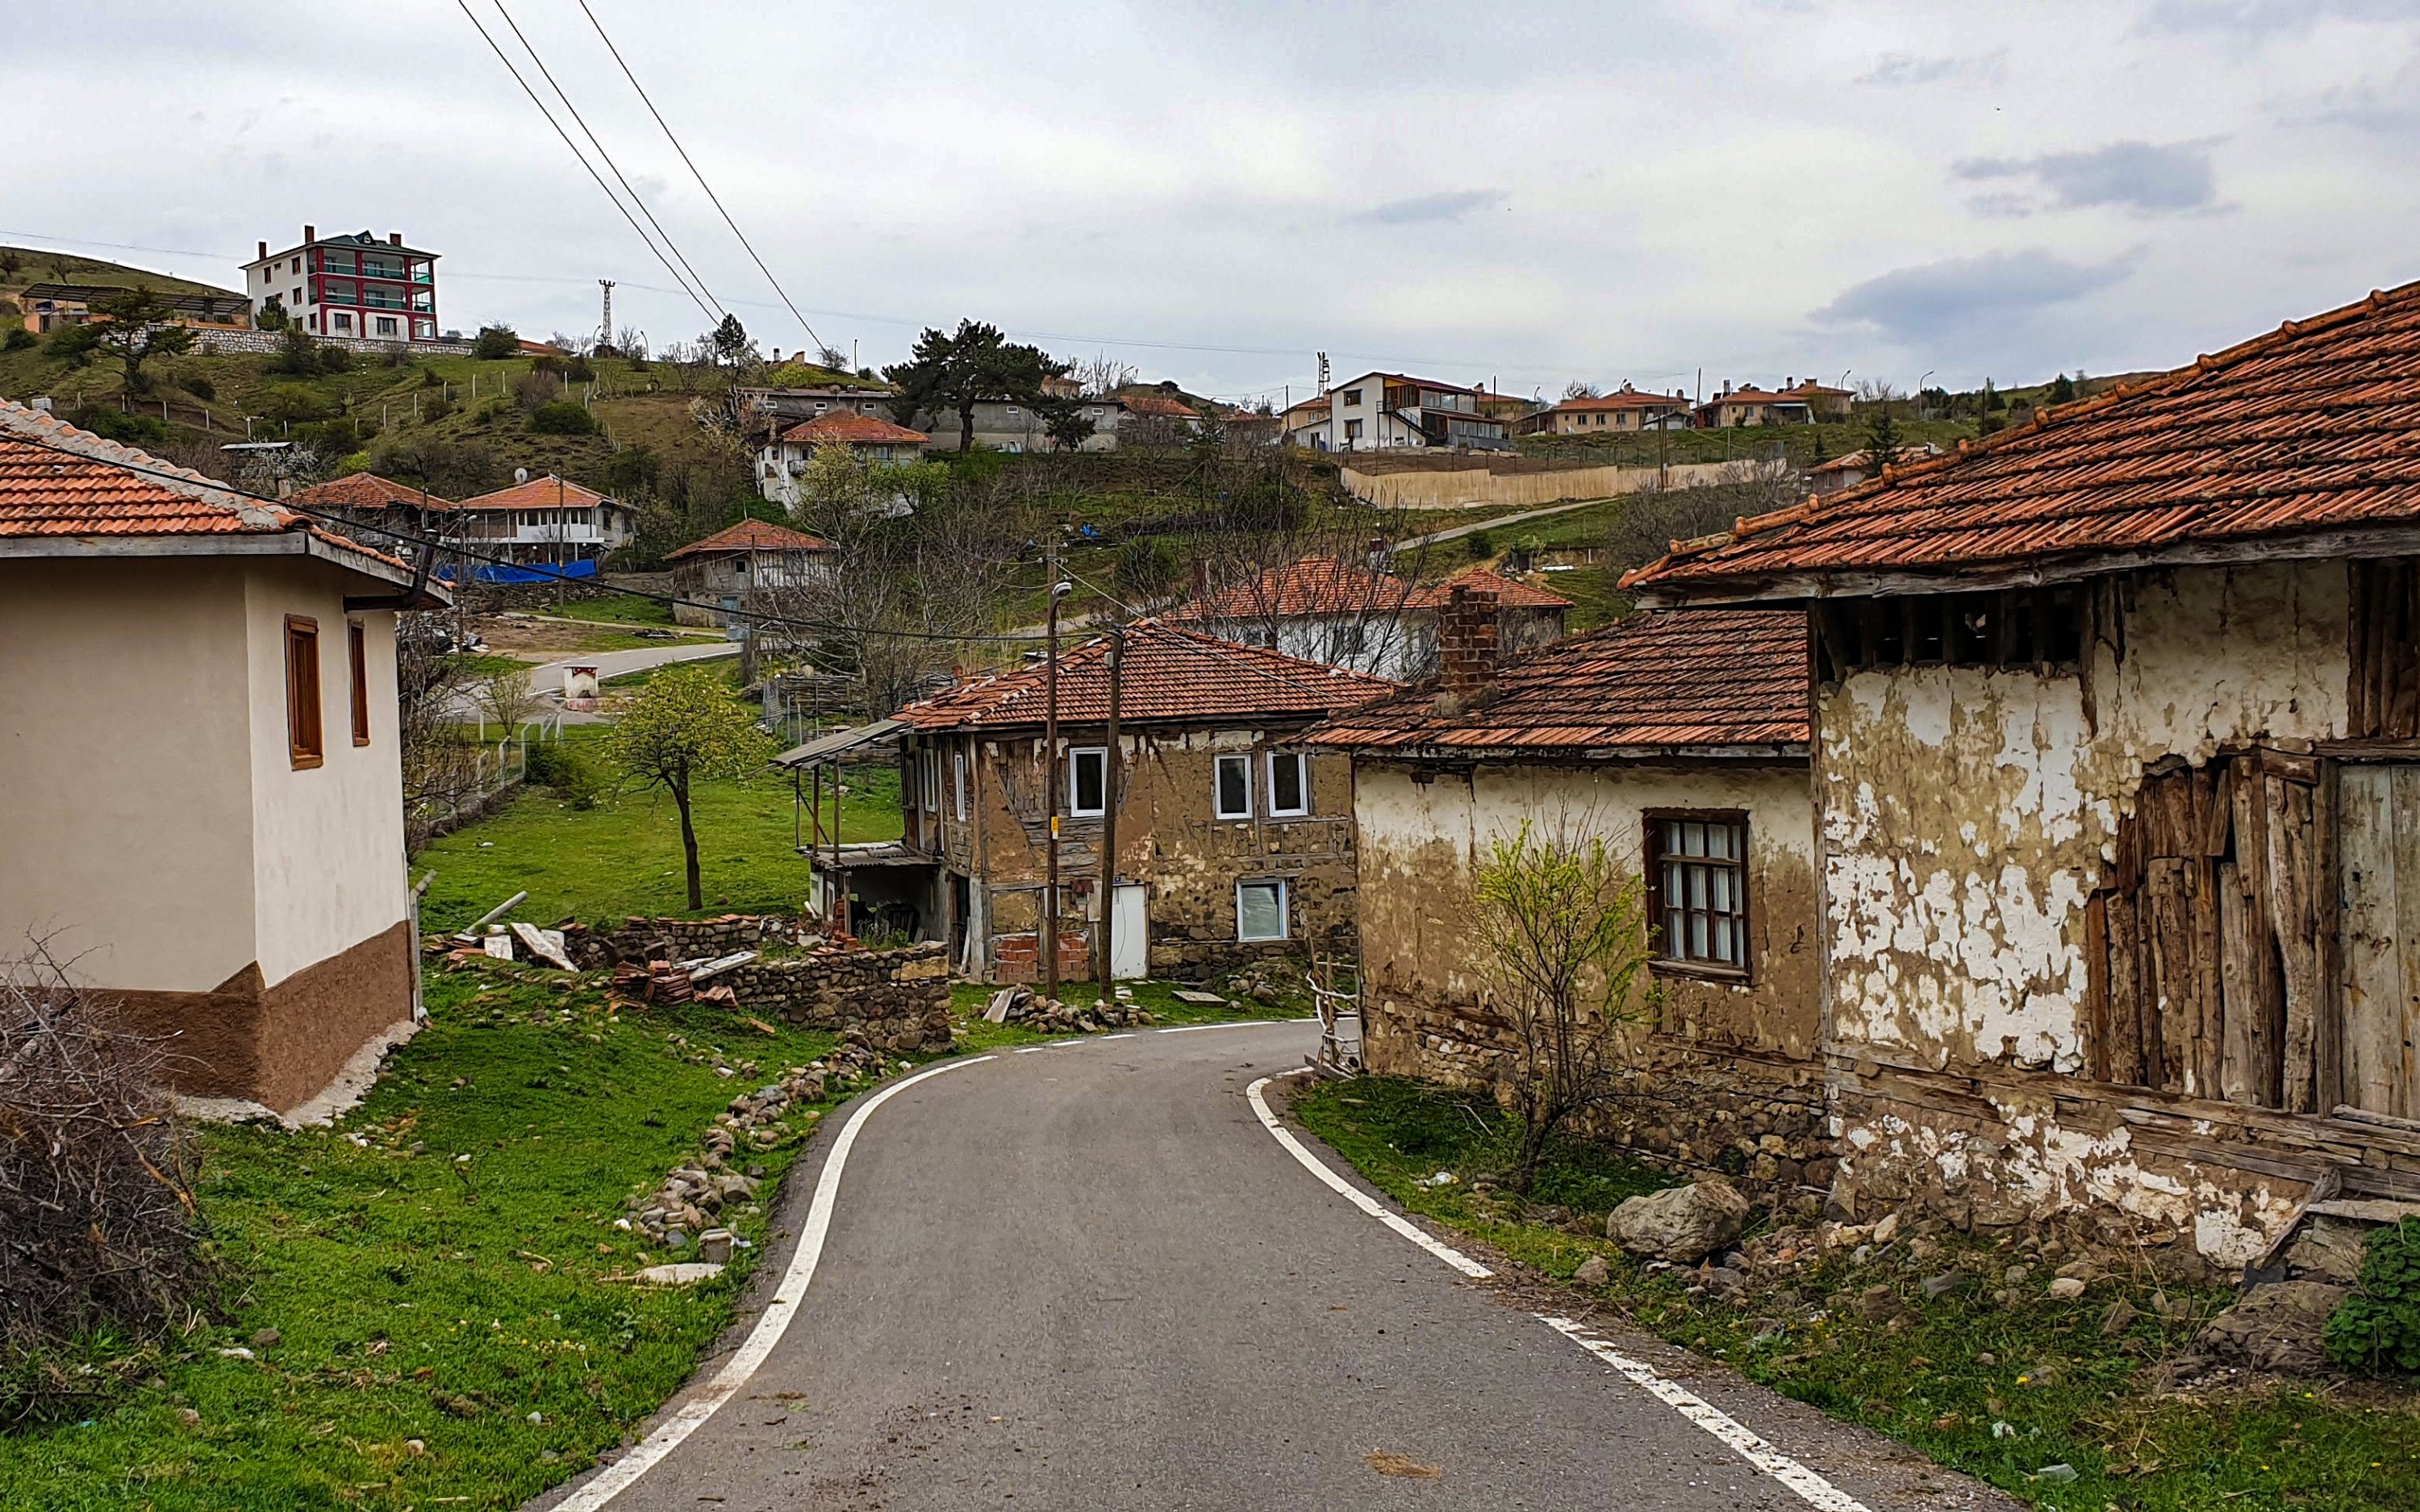 A view of a small village on the way to Alicin Monastery. (Photo by Argun Konuk)